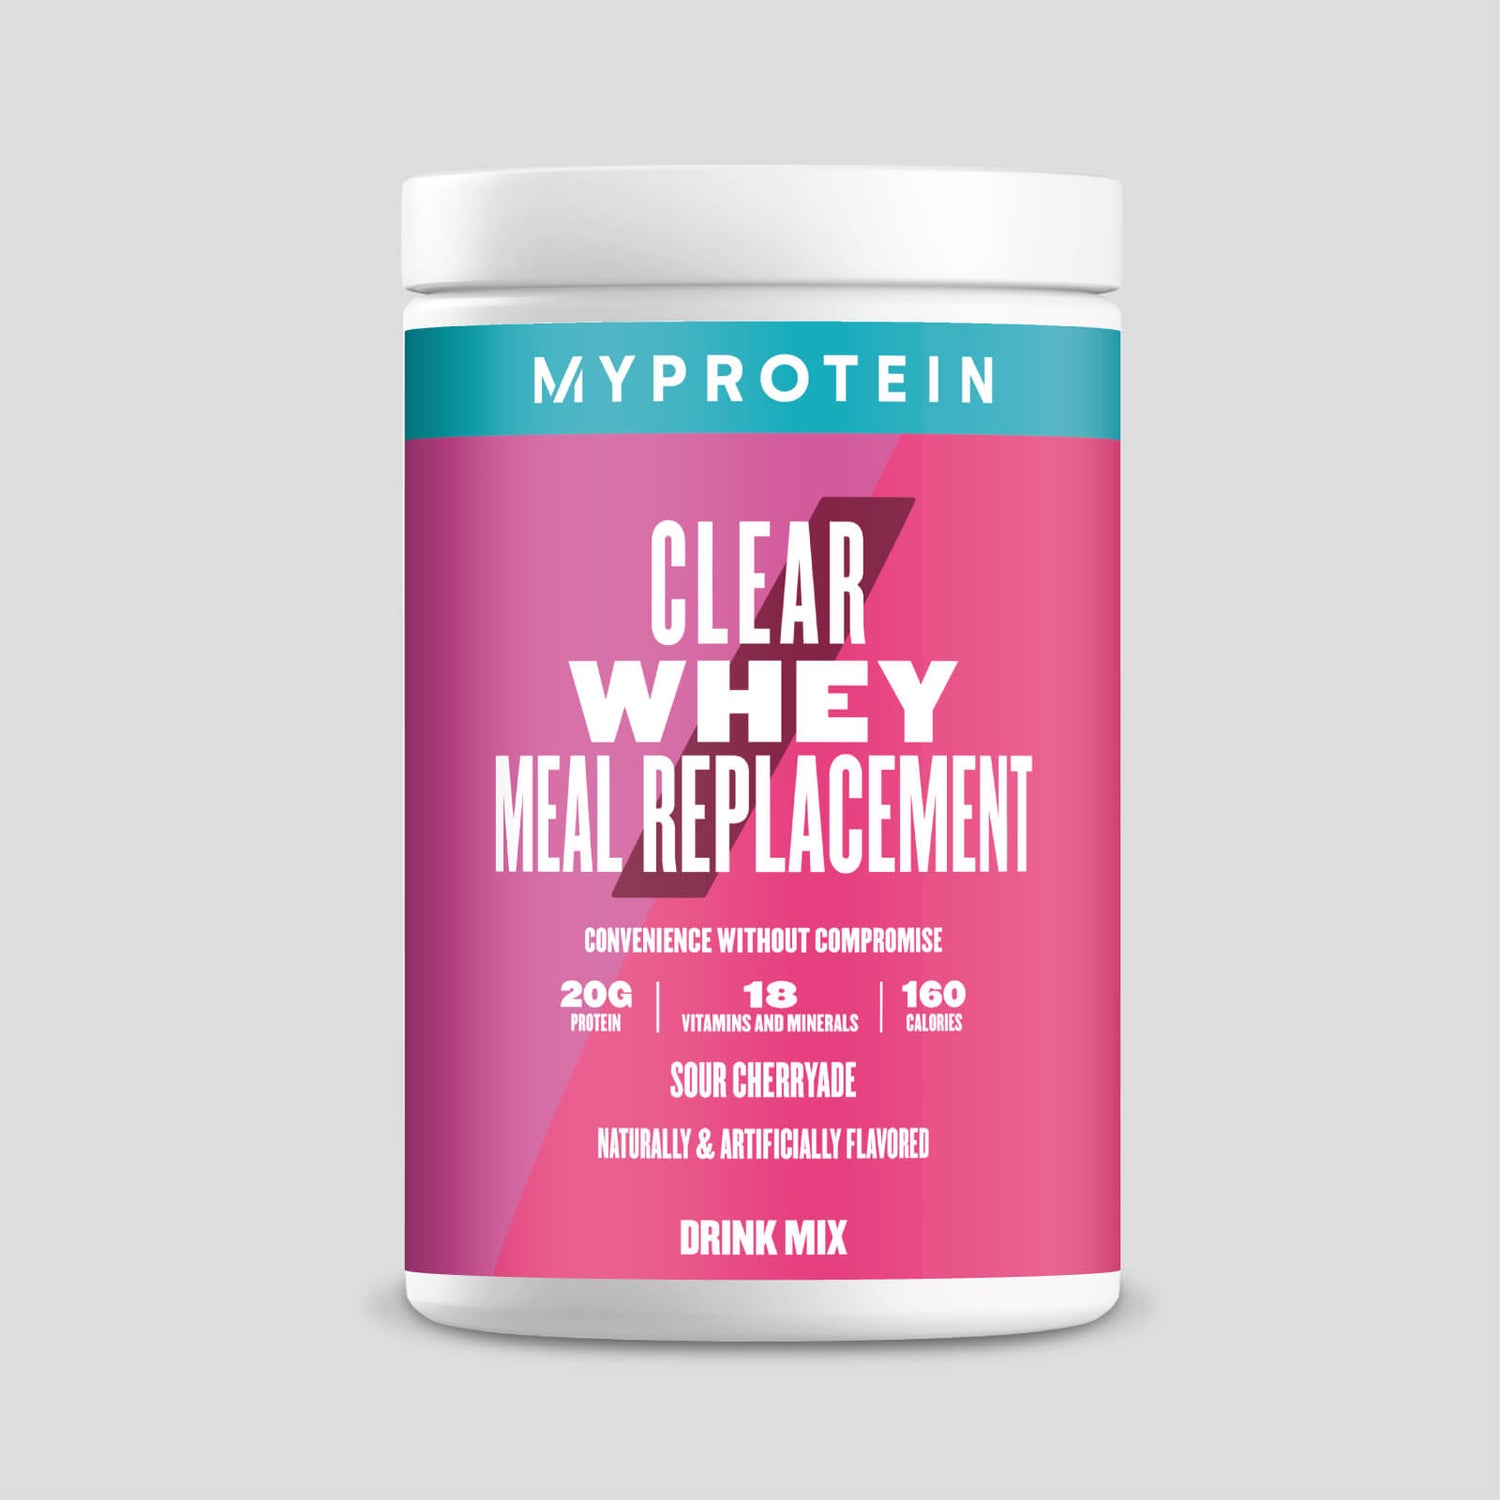 Clear Whey Meal Replacement - 1.44lb - Sour Cherryade